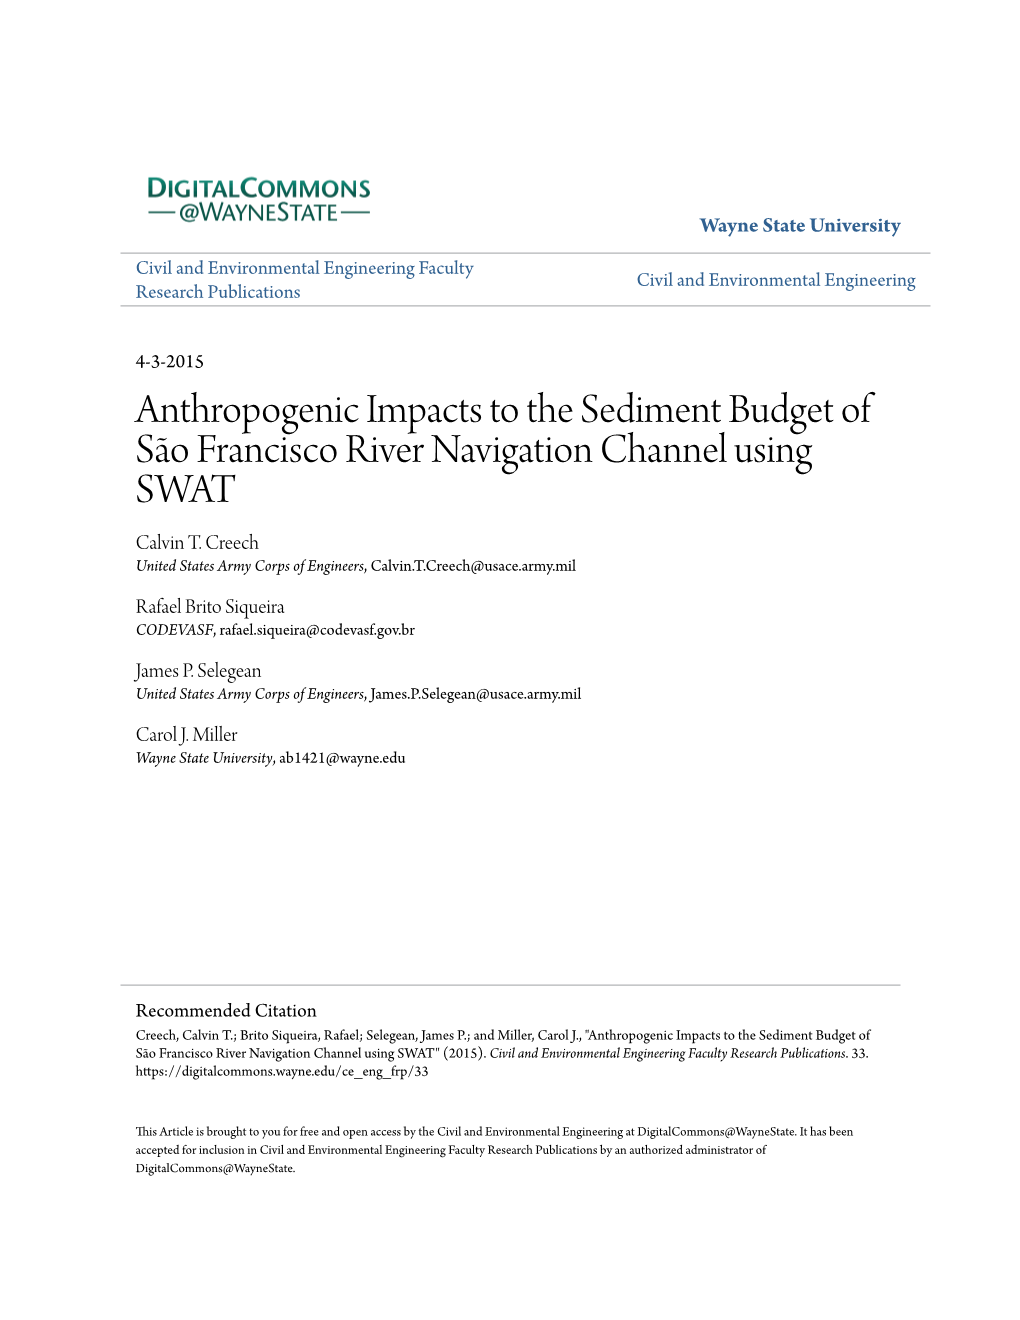 Anthropogenic Impacts to the Sediment Budget of São Francisco River Navigation Channel Using SWAT Calvin T